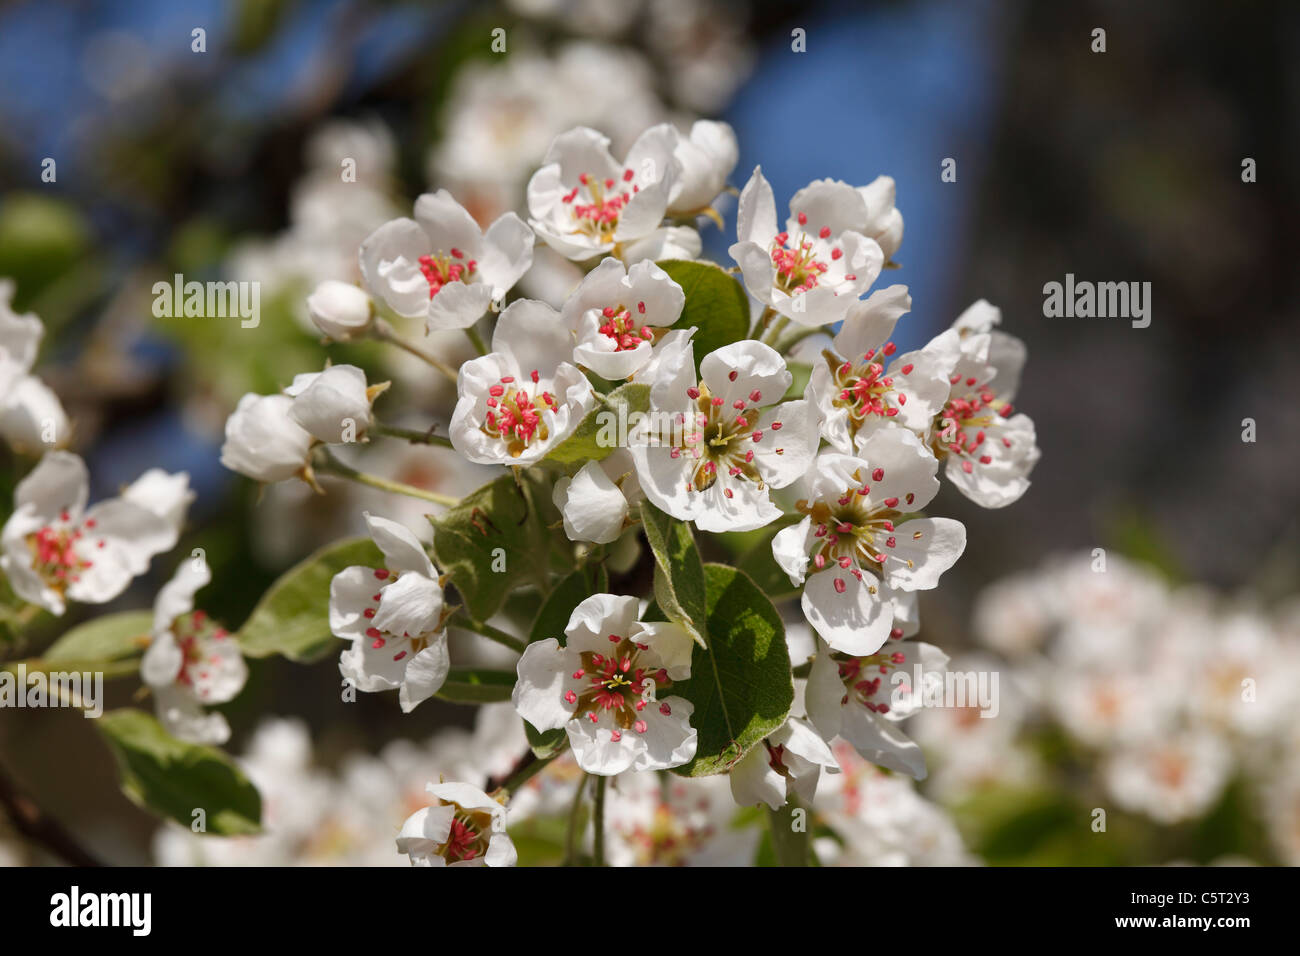 Germany, Bavaria, Franconia, View of blossoms of pear tree, close up Stock Photo